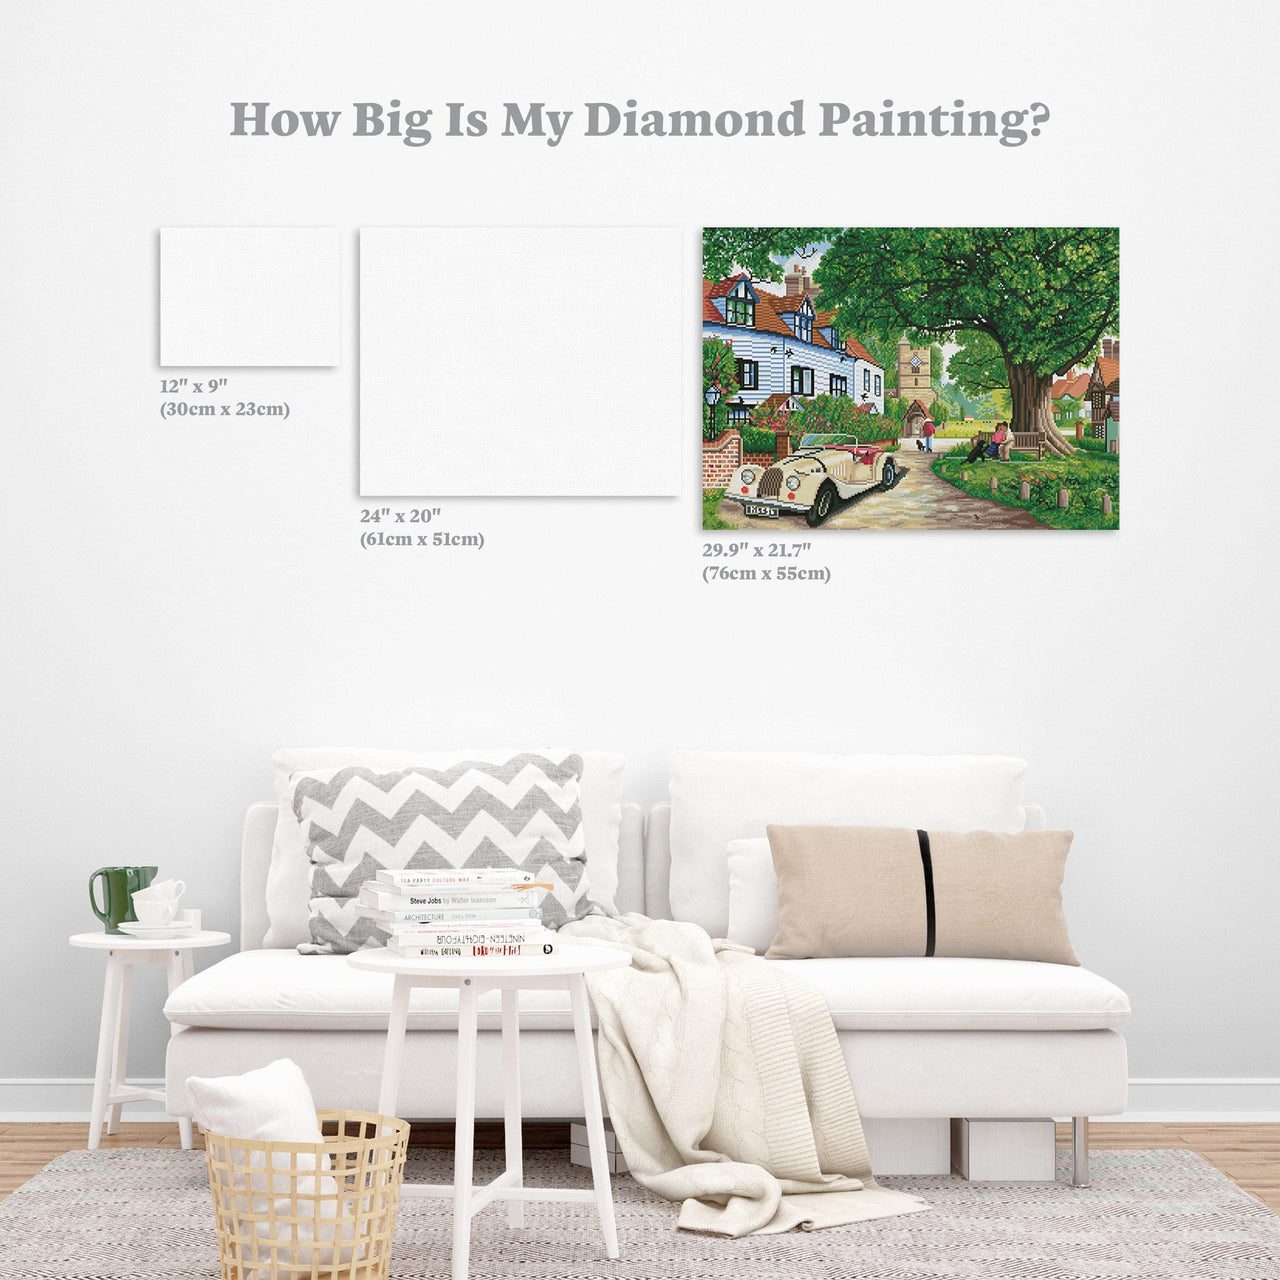 Diamond Painting A Drive Out 21.7" x 29.9″ (55cm x 76cm) / Round With 45 Colors Including 2 ABs / 52,455